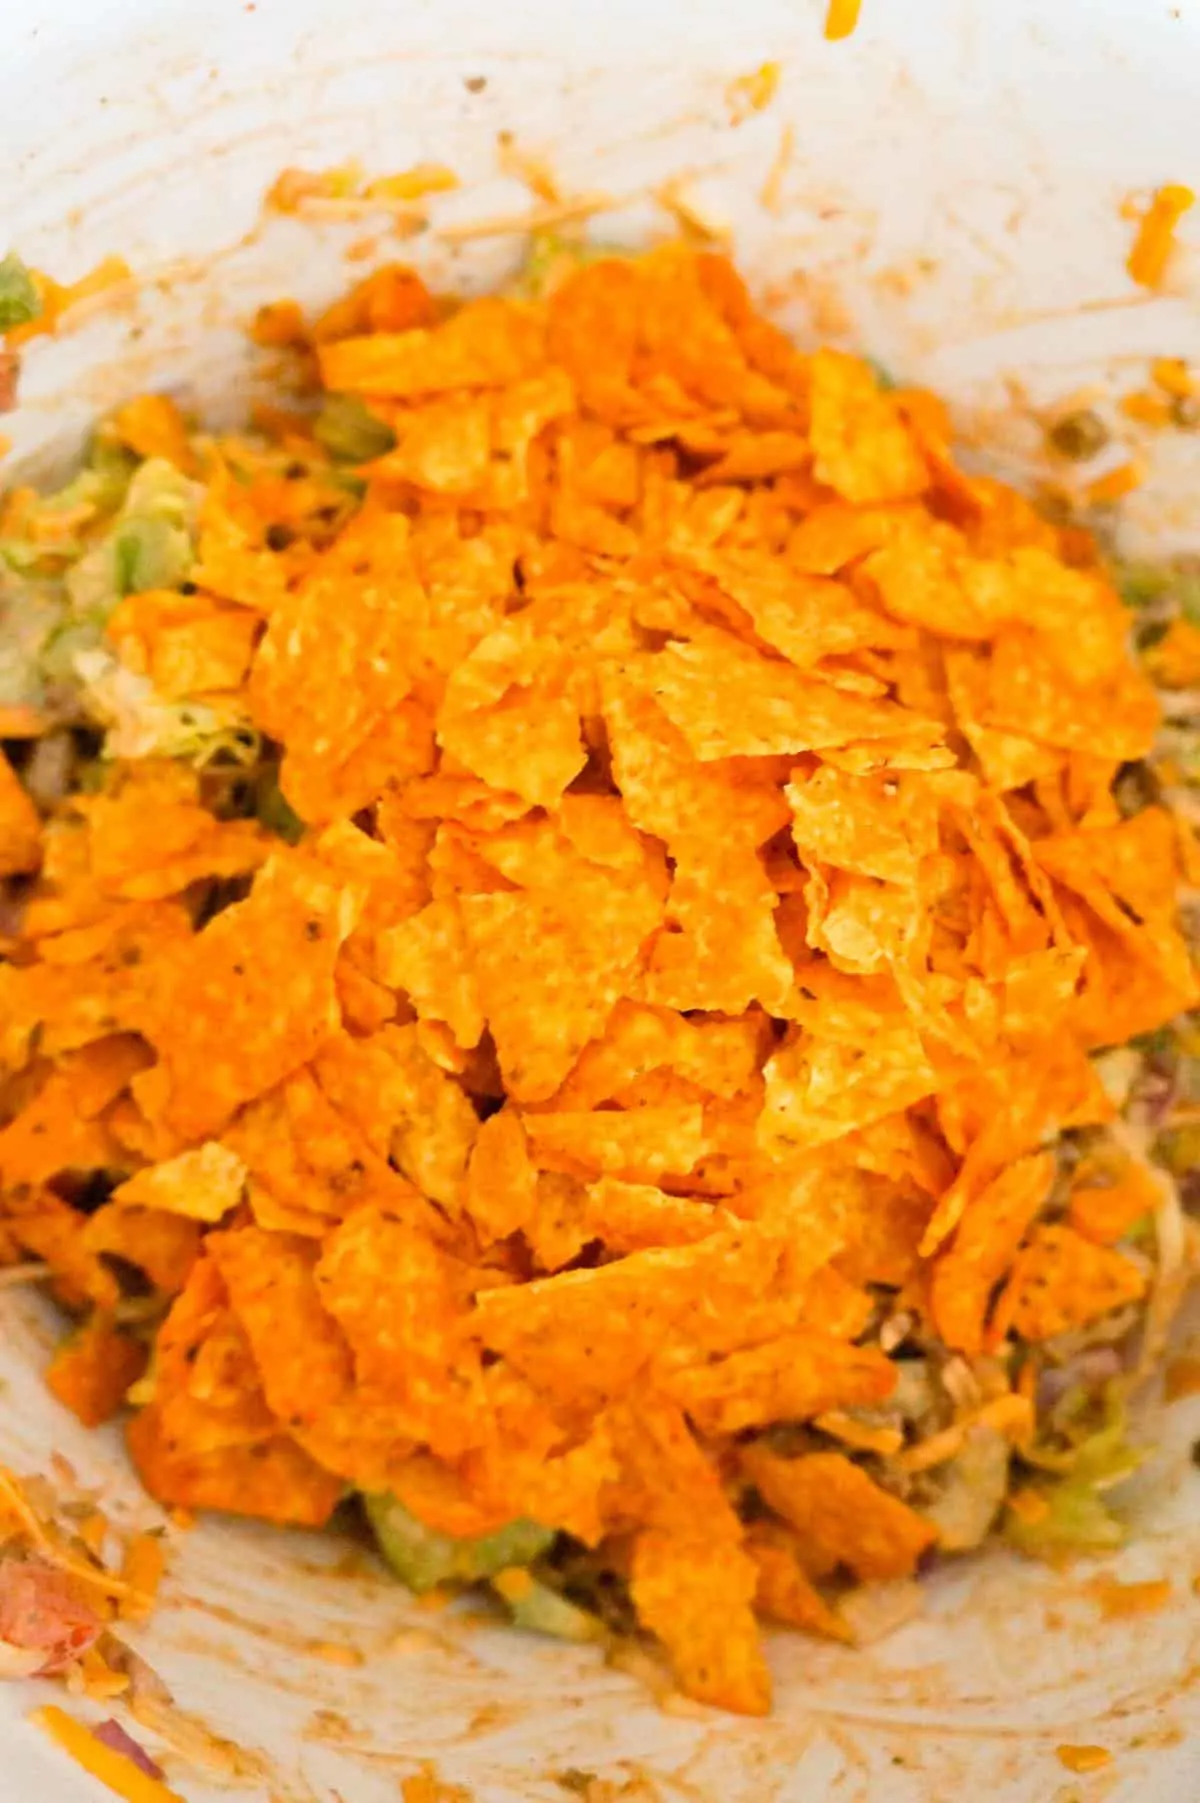 crumbled Doritos on top of salad in a mixing bowl